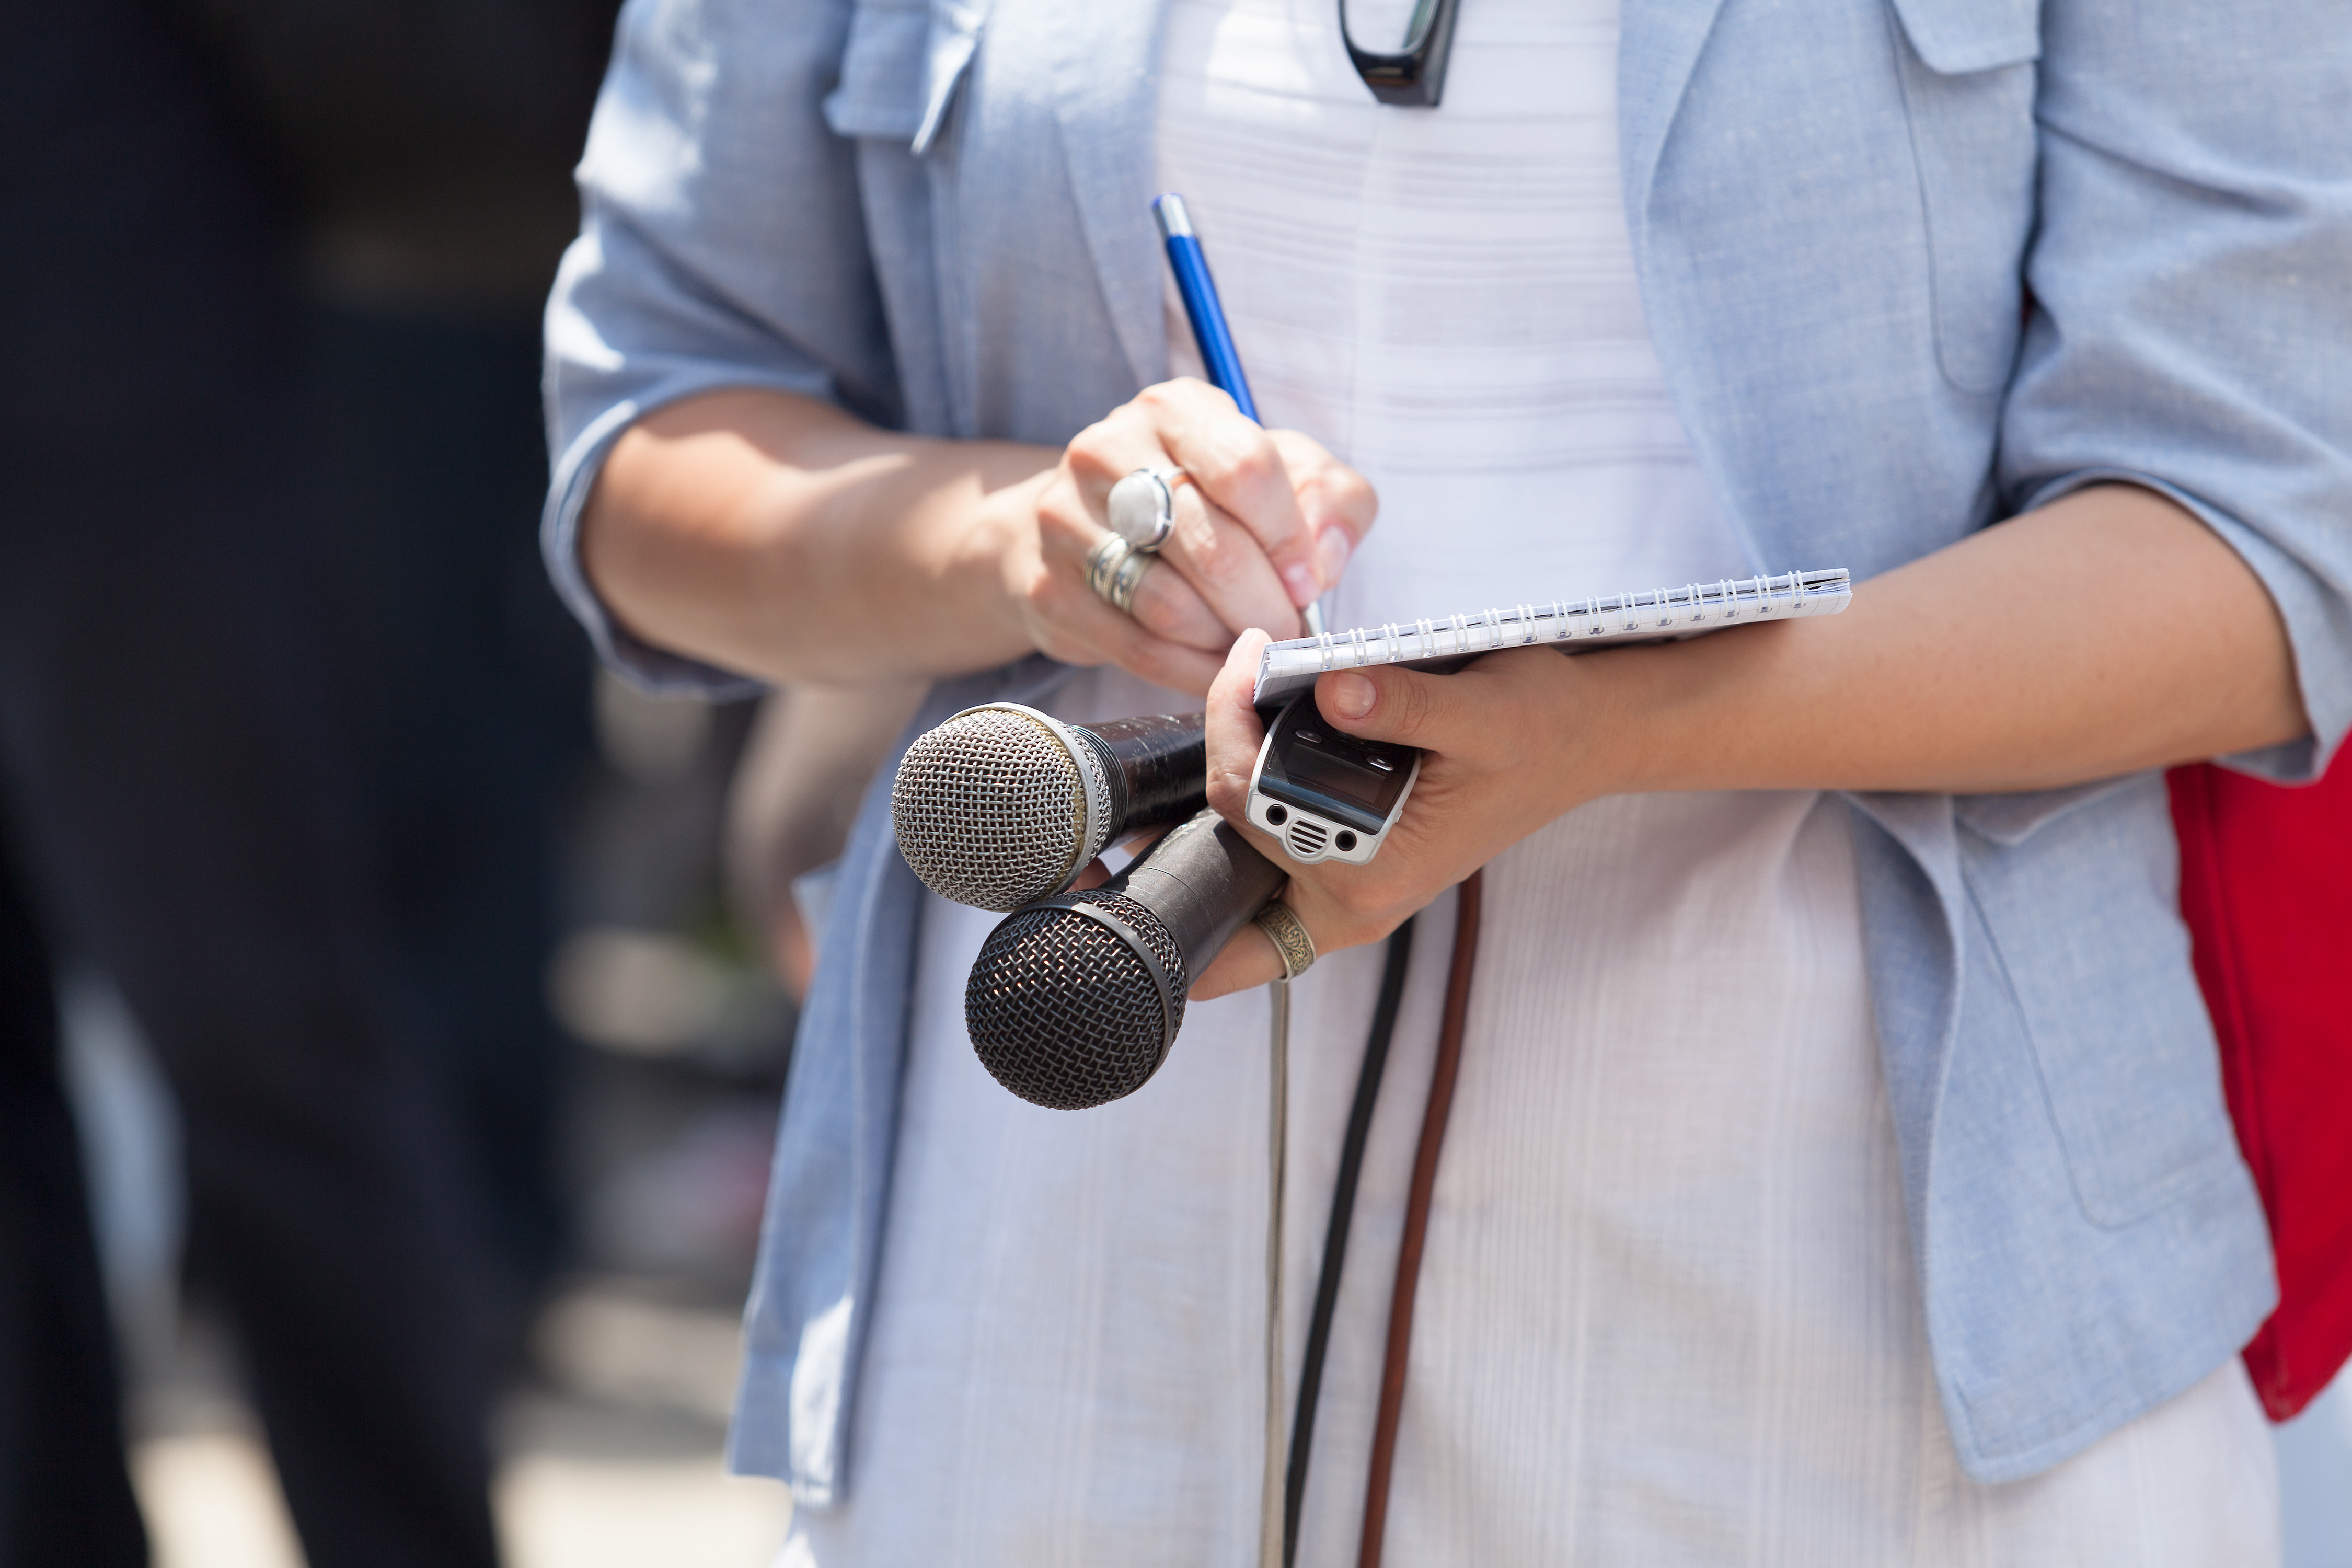 A cropped photo features the torso of a person holding microphones and writing in a spiral notebook